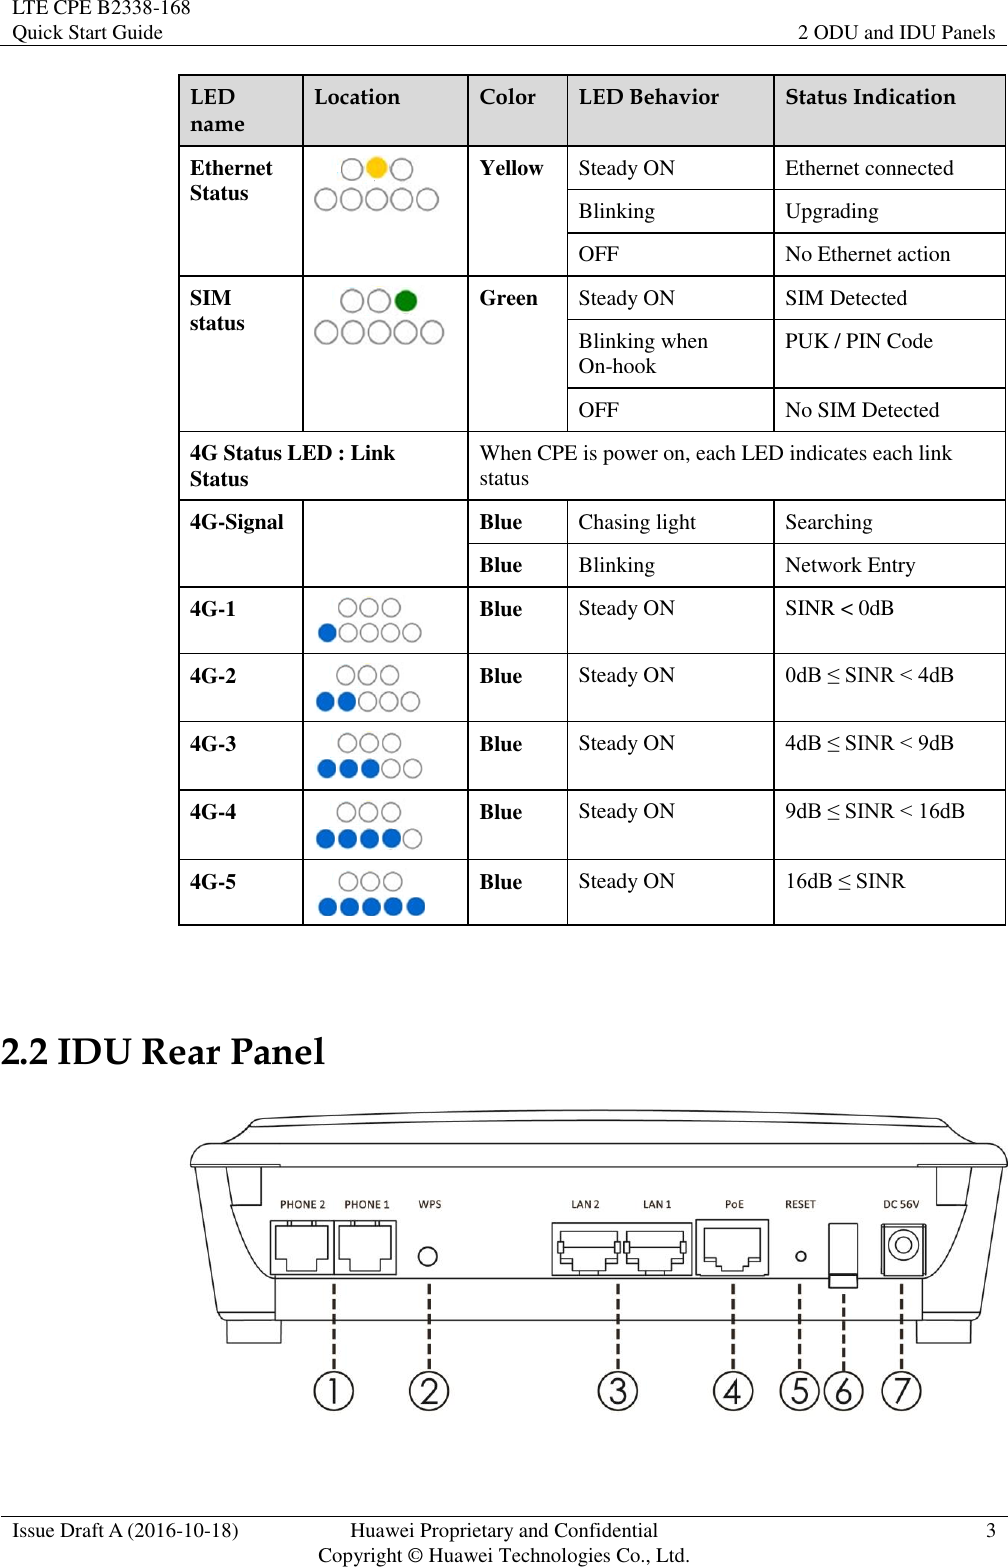 LTE CPE B2338-168   Quick Start Guide 2 ODU and IDU Panels  Issue Draft A (2016-10-18) Huawei Proprietary and Confidential                                     Copyright ©  Huawei Technologies Co., Ltd. 3  LED name Location Color LED Behavior Status Indication Ethernet Status  Yellow Steady ON Ethernet connected Blinking Upgrading OFF No Ethernet action SIM status  Green Steady ON SIM Detected Blinking when On-hook PUK / PIN Code OFF No SIM Detected 4G Status LED : Link Status When CPE is power on, each LED indicates each link status 4G-Signal  Blue Chasing light Searching Blue Blinking Network Entry 4G-1  Blue Steady ON SINR &lt; 0dB 4G-2  Blue Steady ON 0dB ≤ SINR &lt; 4dB 4G-3  Blue Steady ON 4dB ≤ SINR &lt; 9dB 4G-4  Blue Steady ON 9dB ≤ SINR &lt; 16dB 4G-5  Blue Steady ON 16dB ≤ SINR  2.2 IDU Rear Panel  